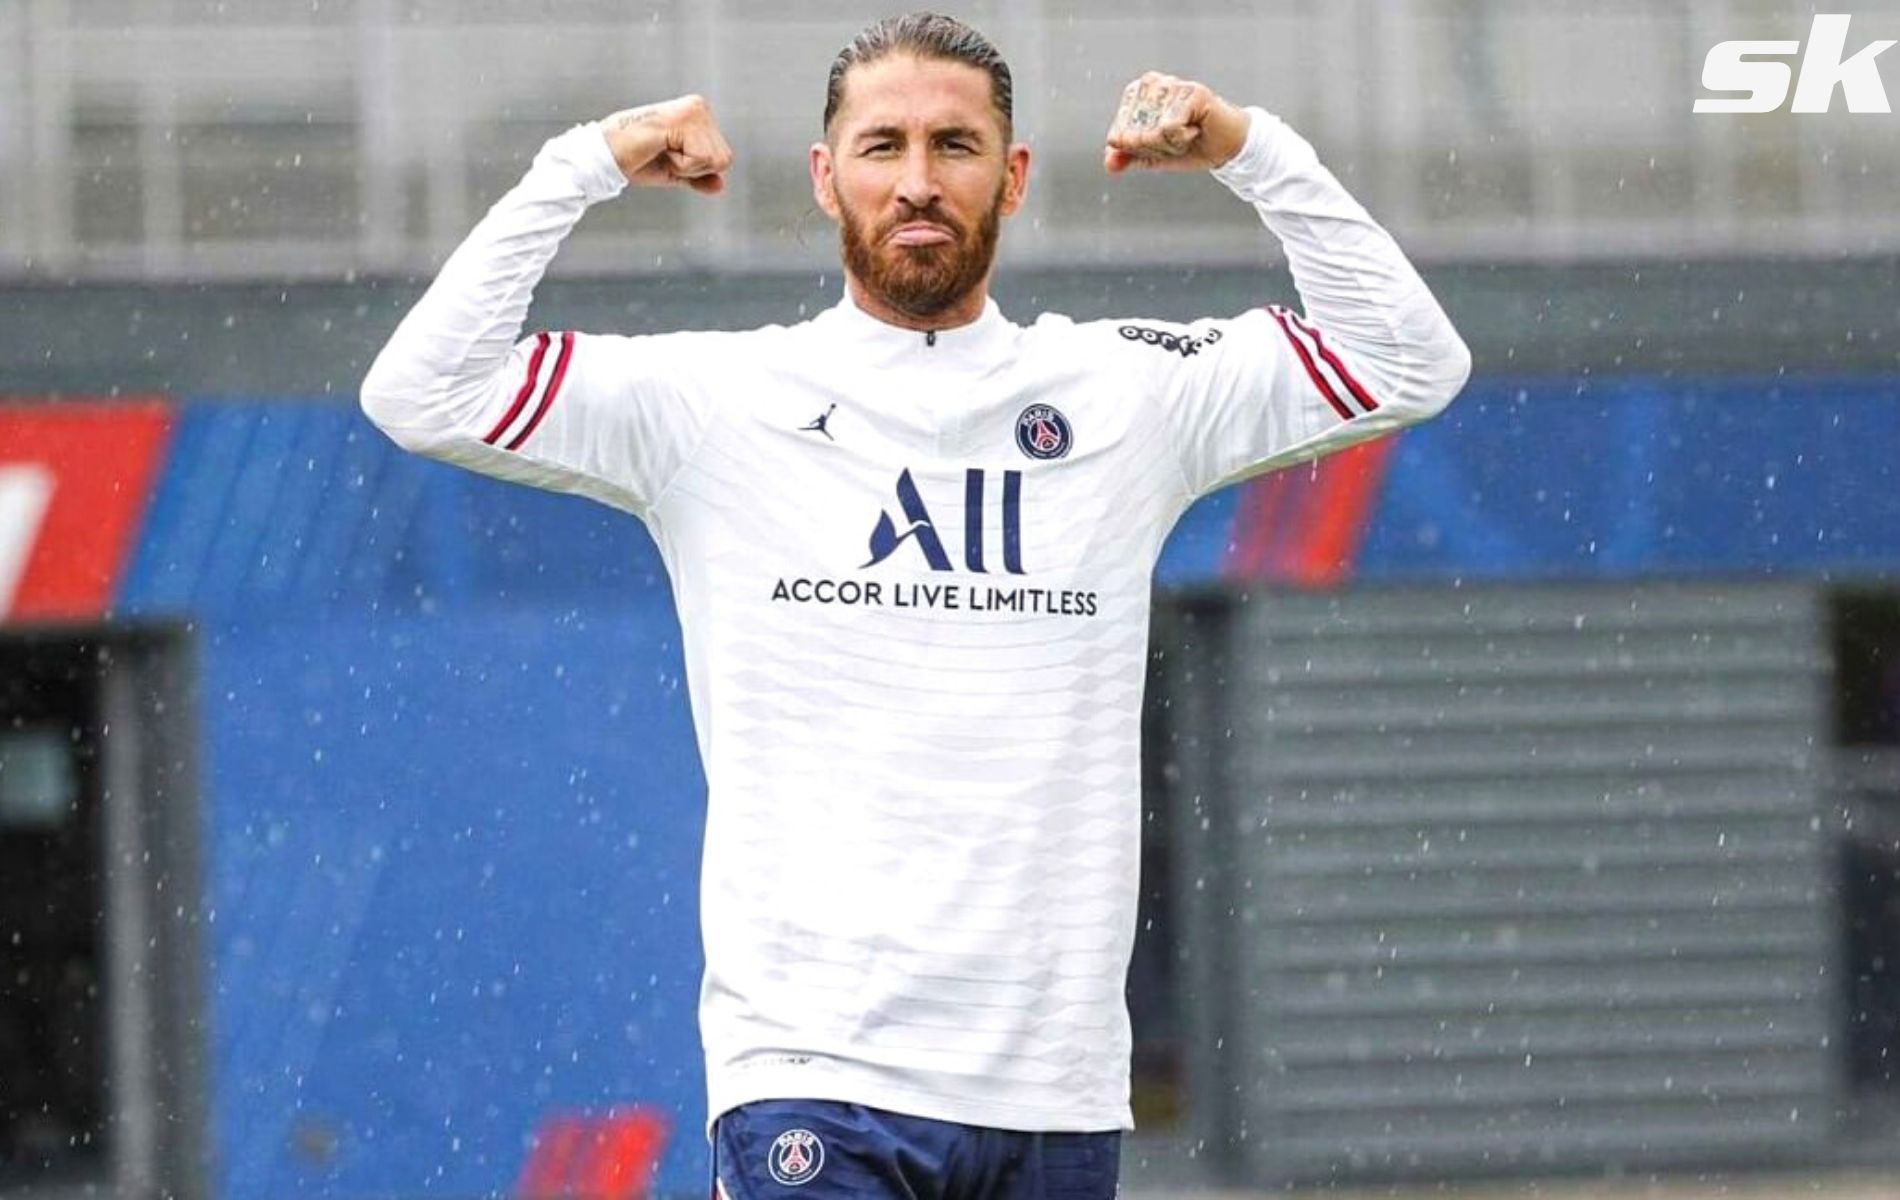 Ramos finally made his PSG debut during the game against Saint Etienne